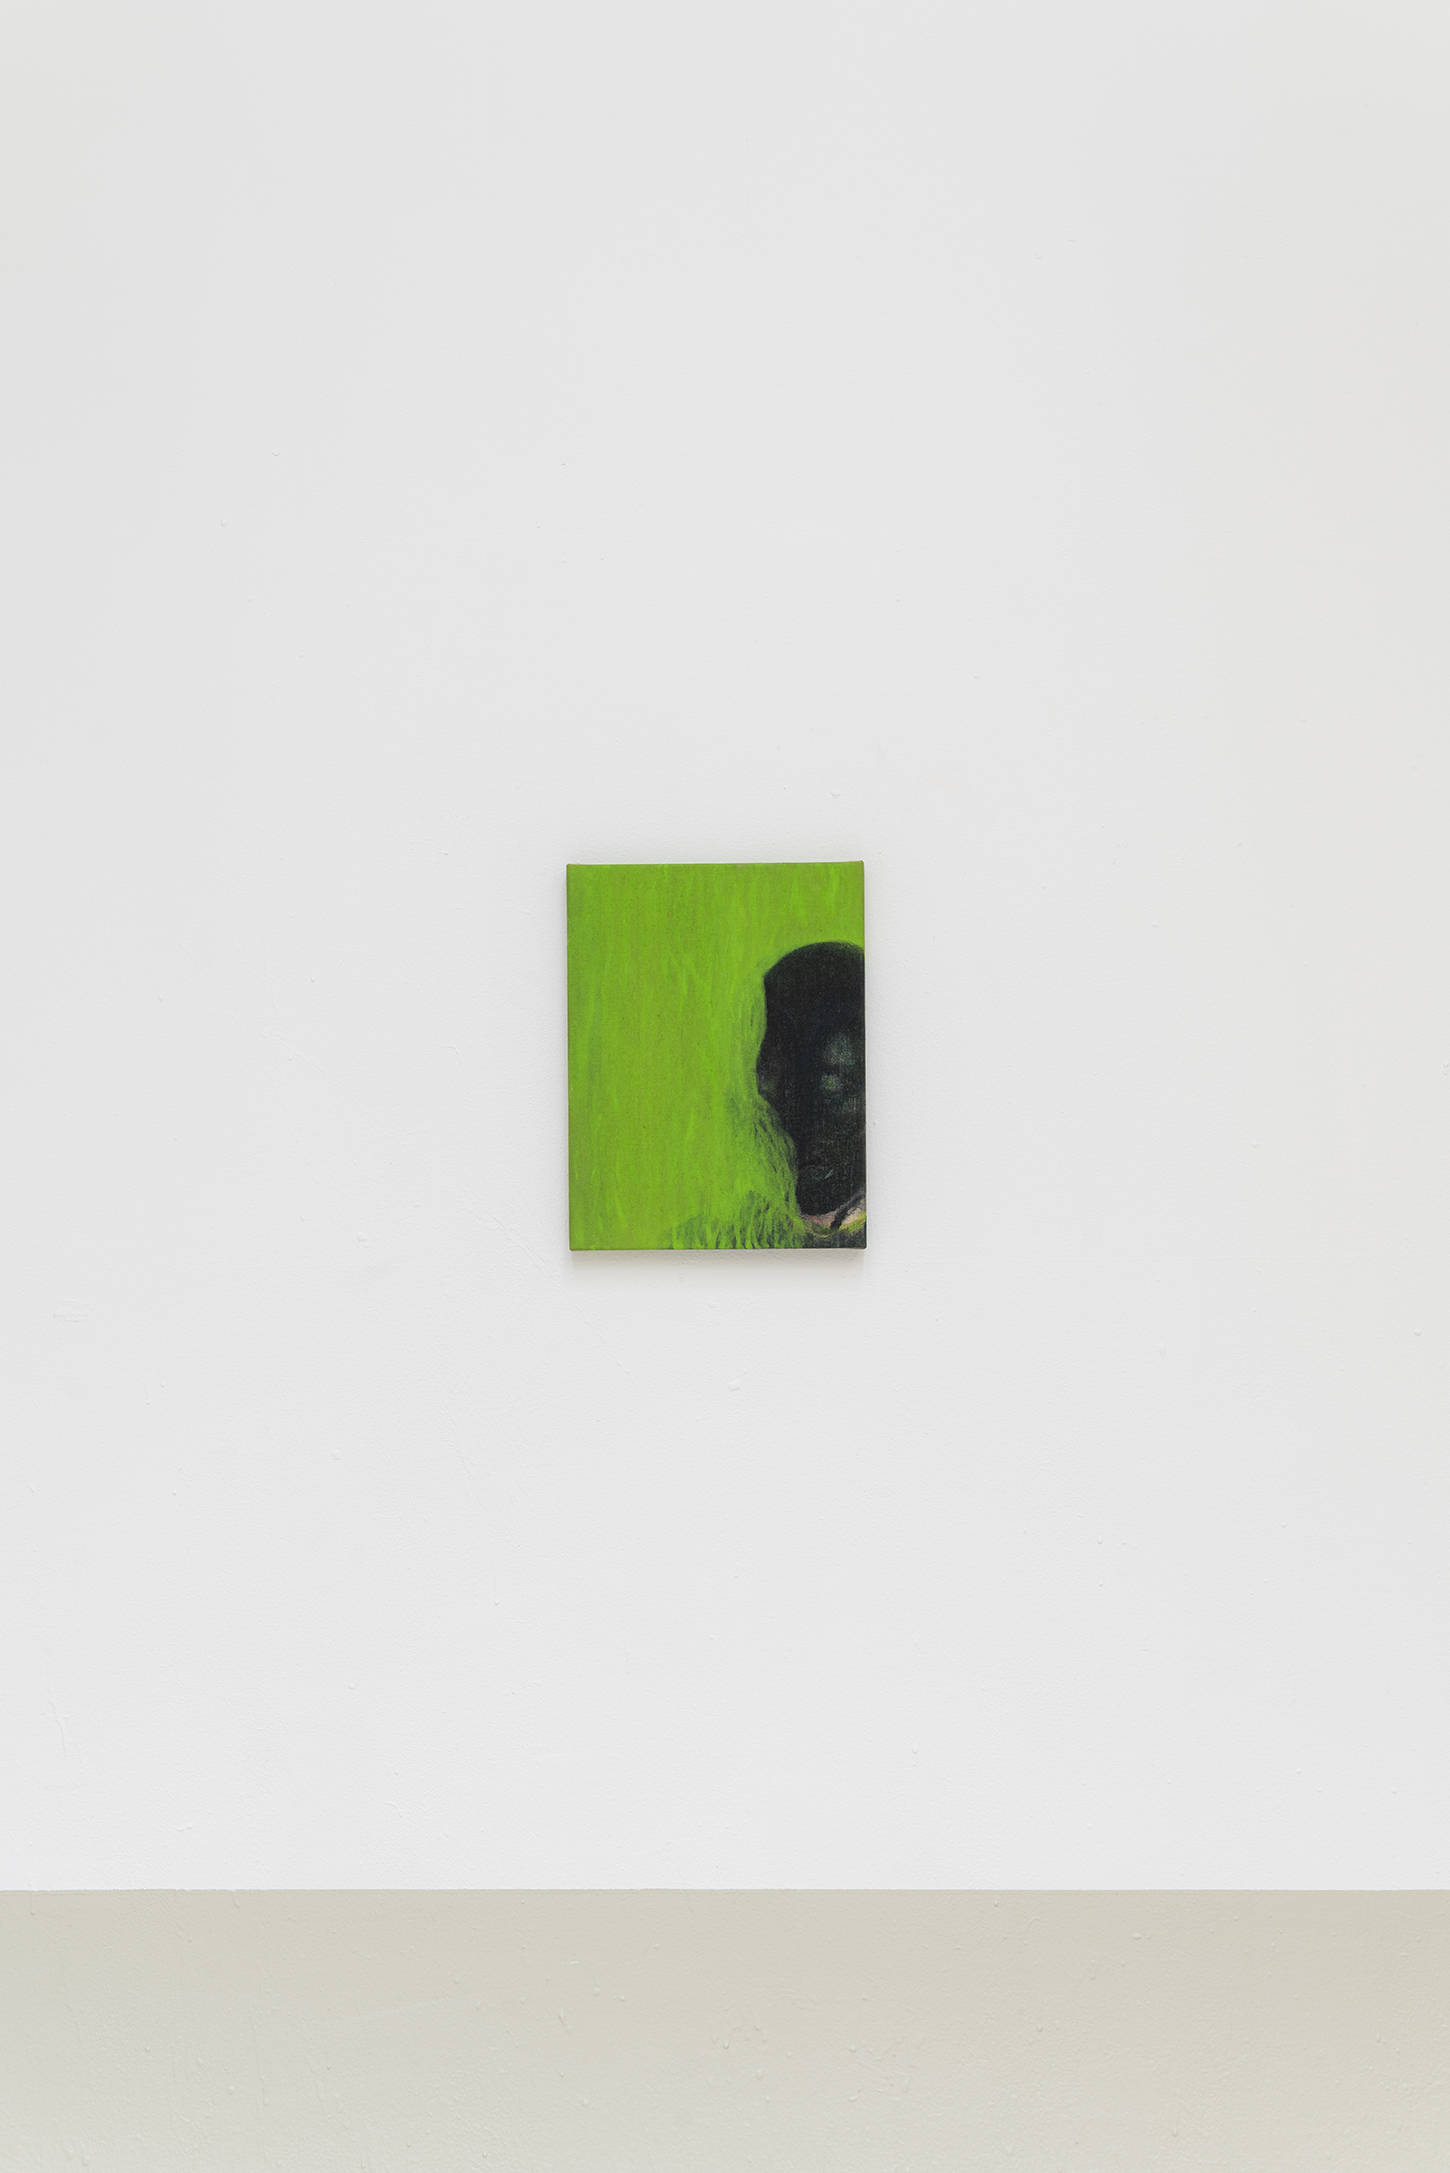 Hadrien Jacquelet, Untitled (Green), 2022-2021,  Oil on canvas, 37 x 25 cm